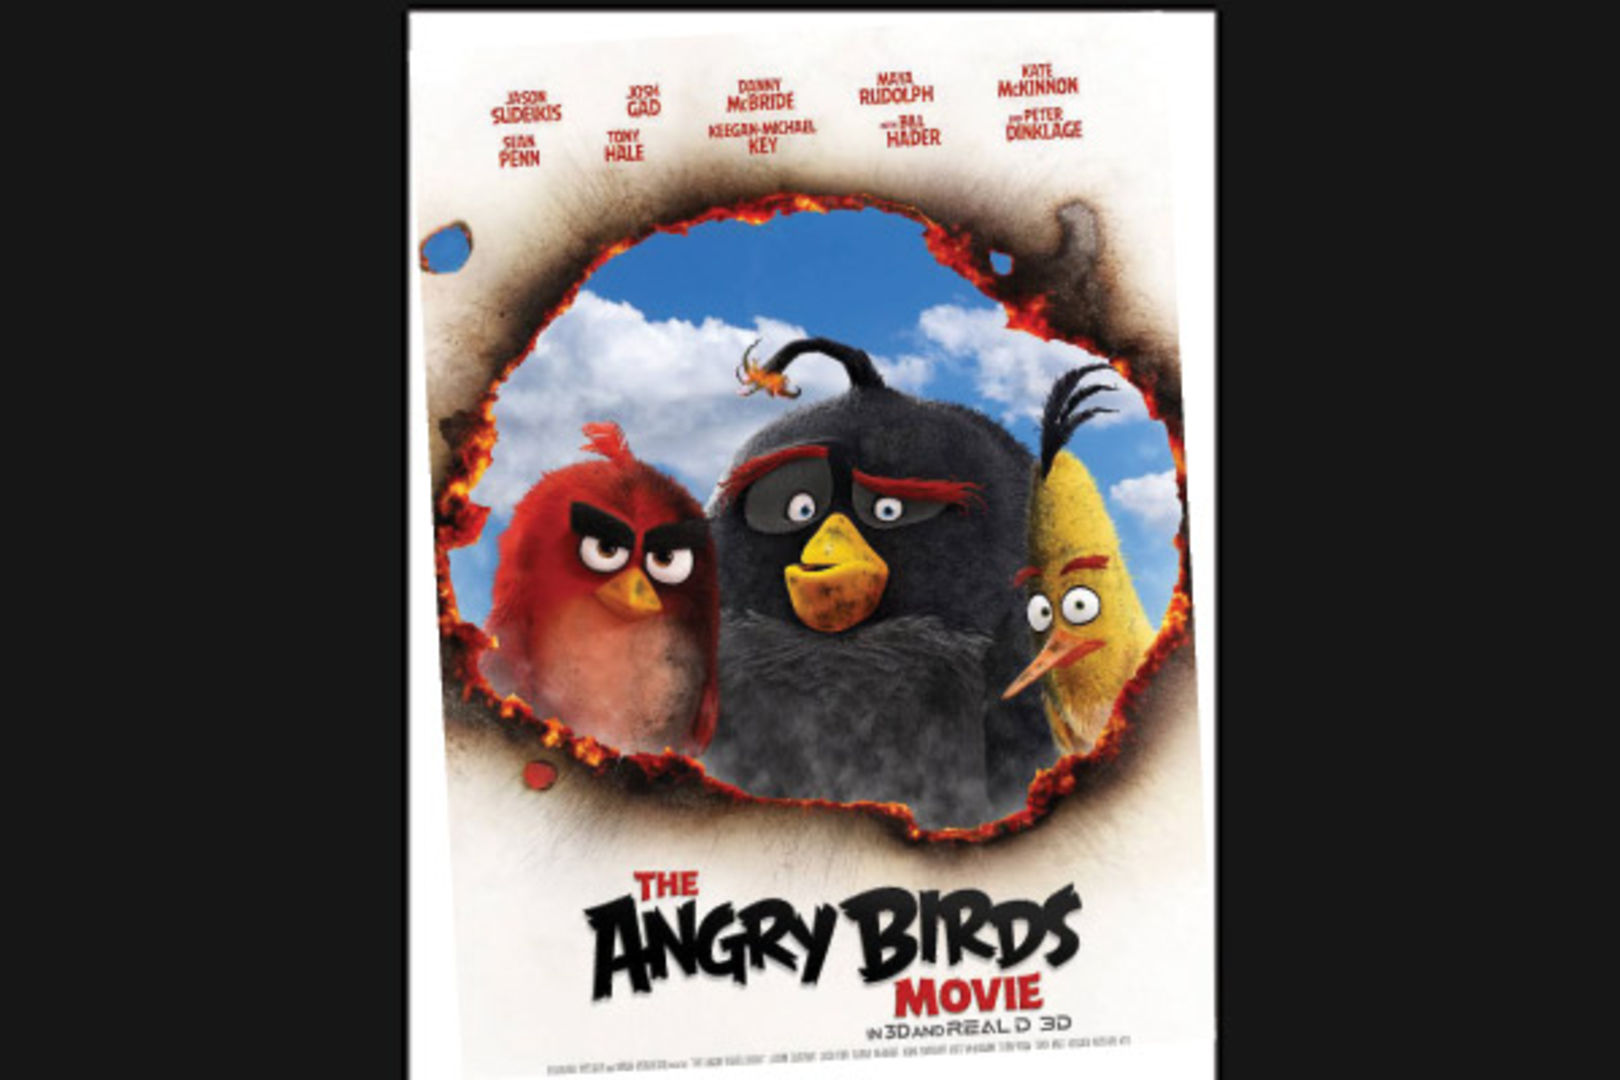 MOVIE REVIEW: The Angry Birds Movie | Nation